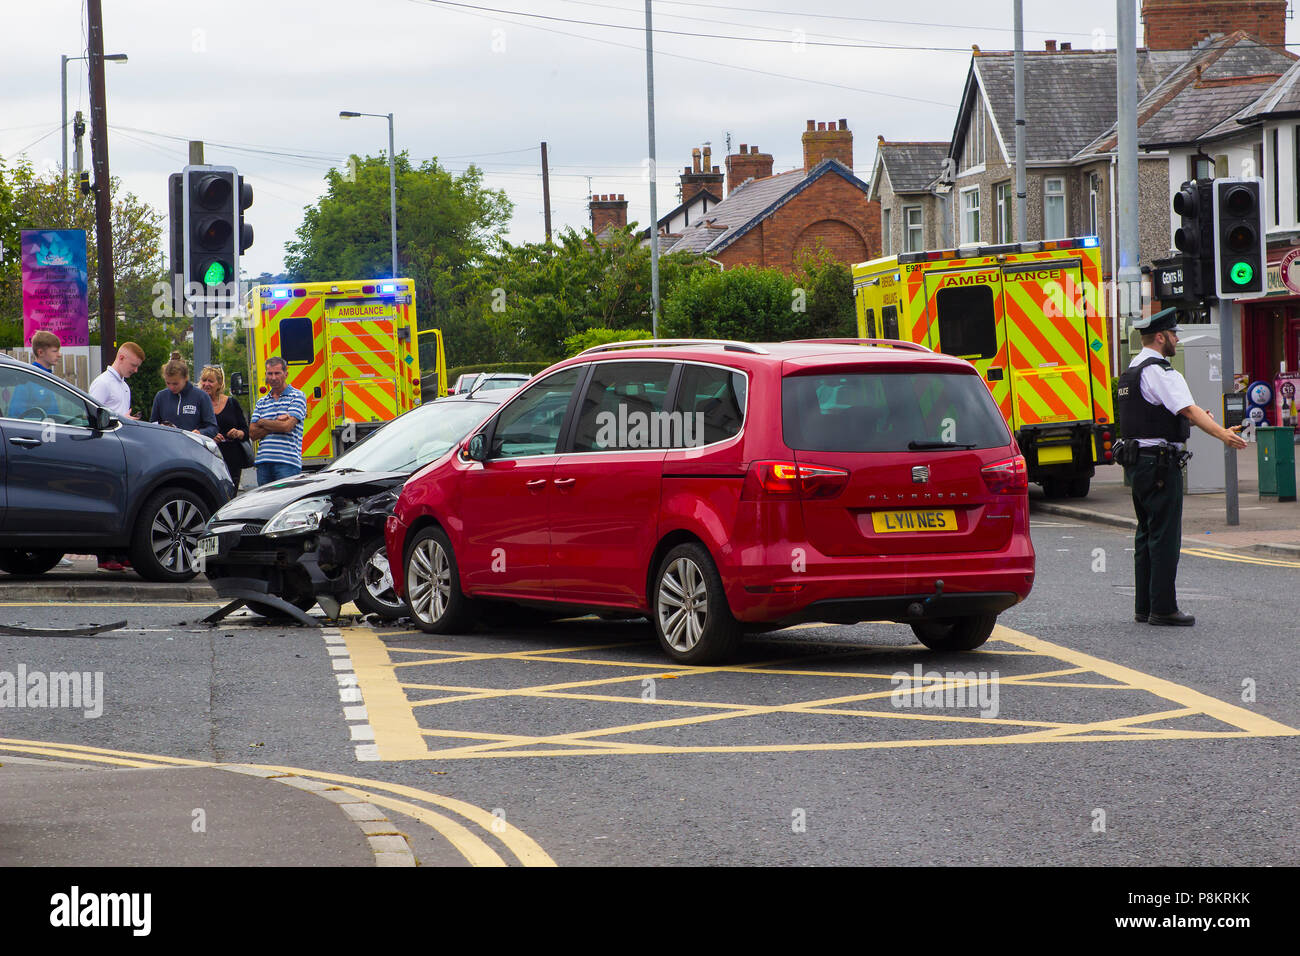 Ballyholme, Northern Ireland. 12th July 2018. A multi vehicle road traffic accident at Ballyholme in Bangor County Ddown Northern Ireland with two ambulances in attendance. details of any injured persons are not yet available but the image shows extensive damge to vehichles with one having mounted the pavement at the entrance to the Windmill Road Credit: MHarp/Alamy Live News Stock Photo